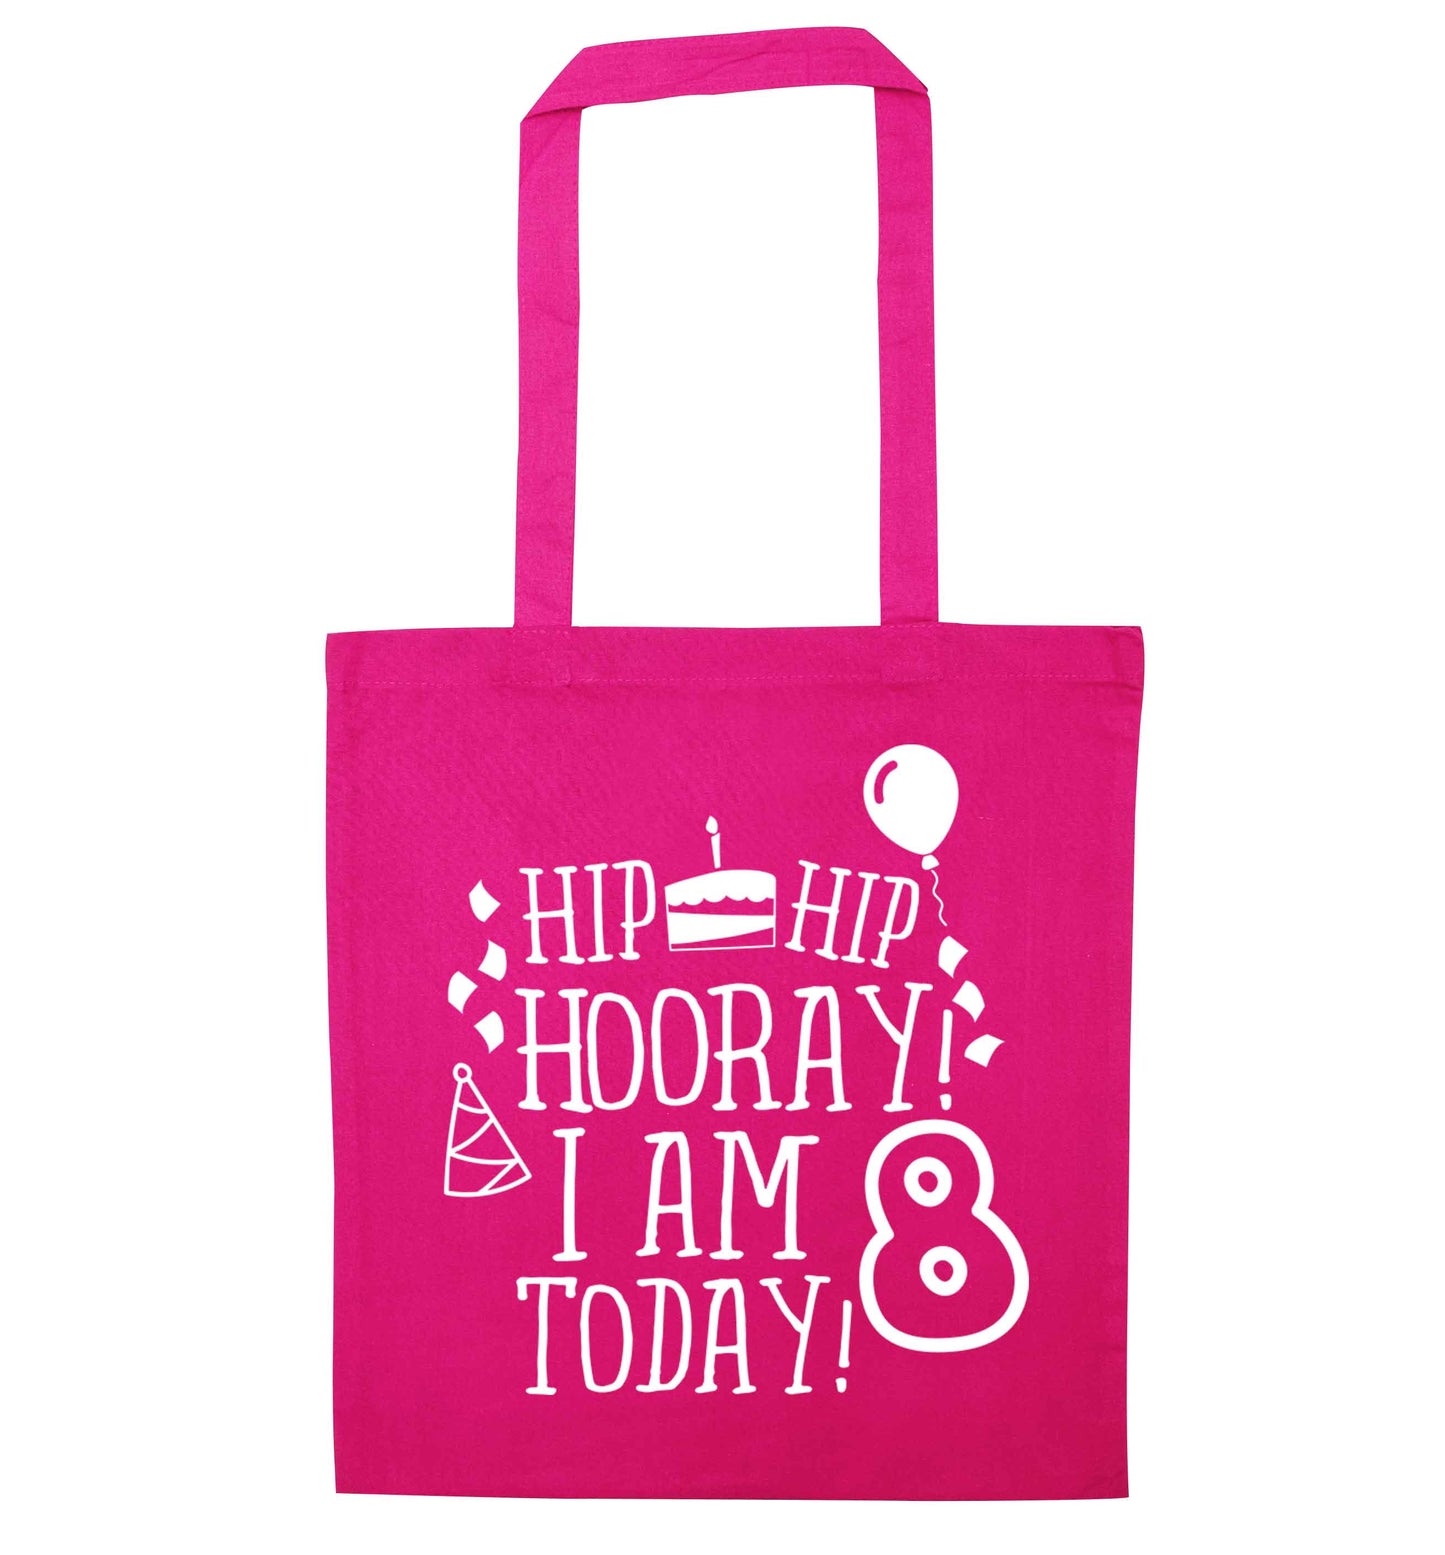 Hip hip hooray I am 8 today! pink tote bag